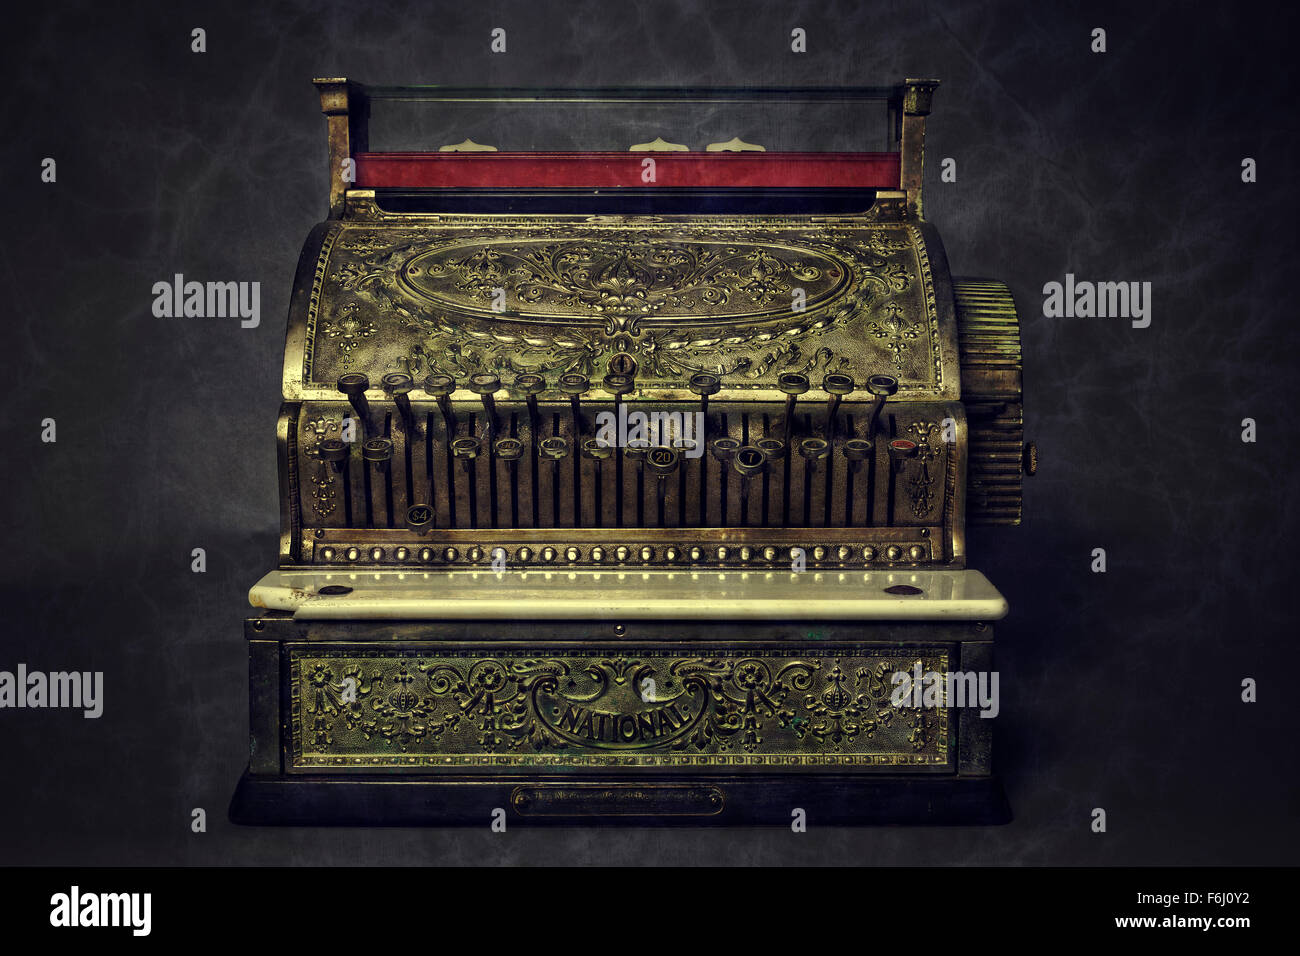 A cash register of gold provides good luck to any establishment. Stock Photo